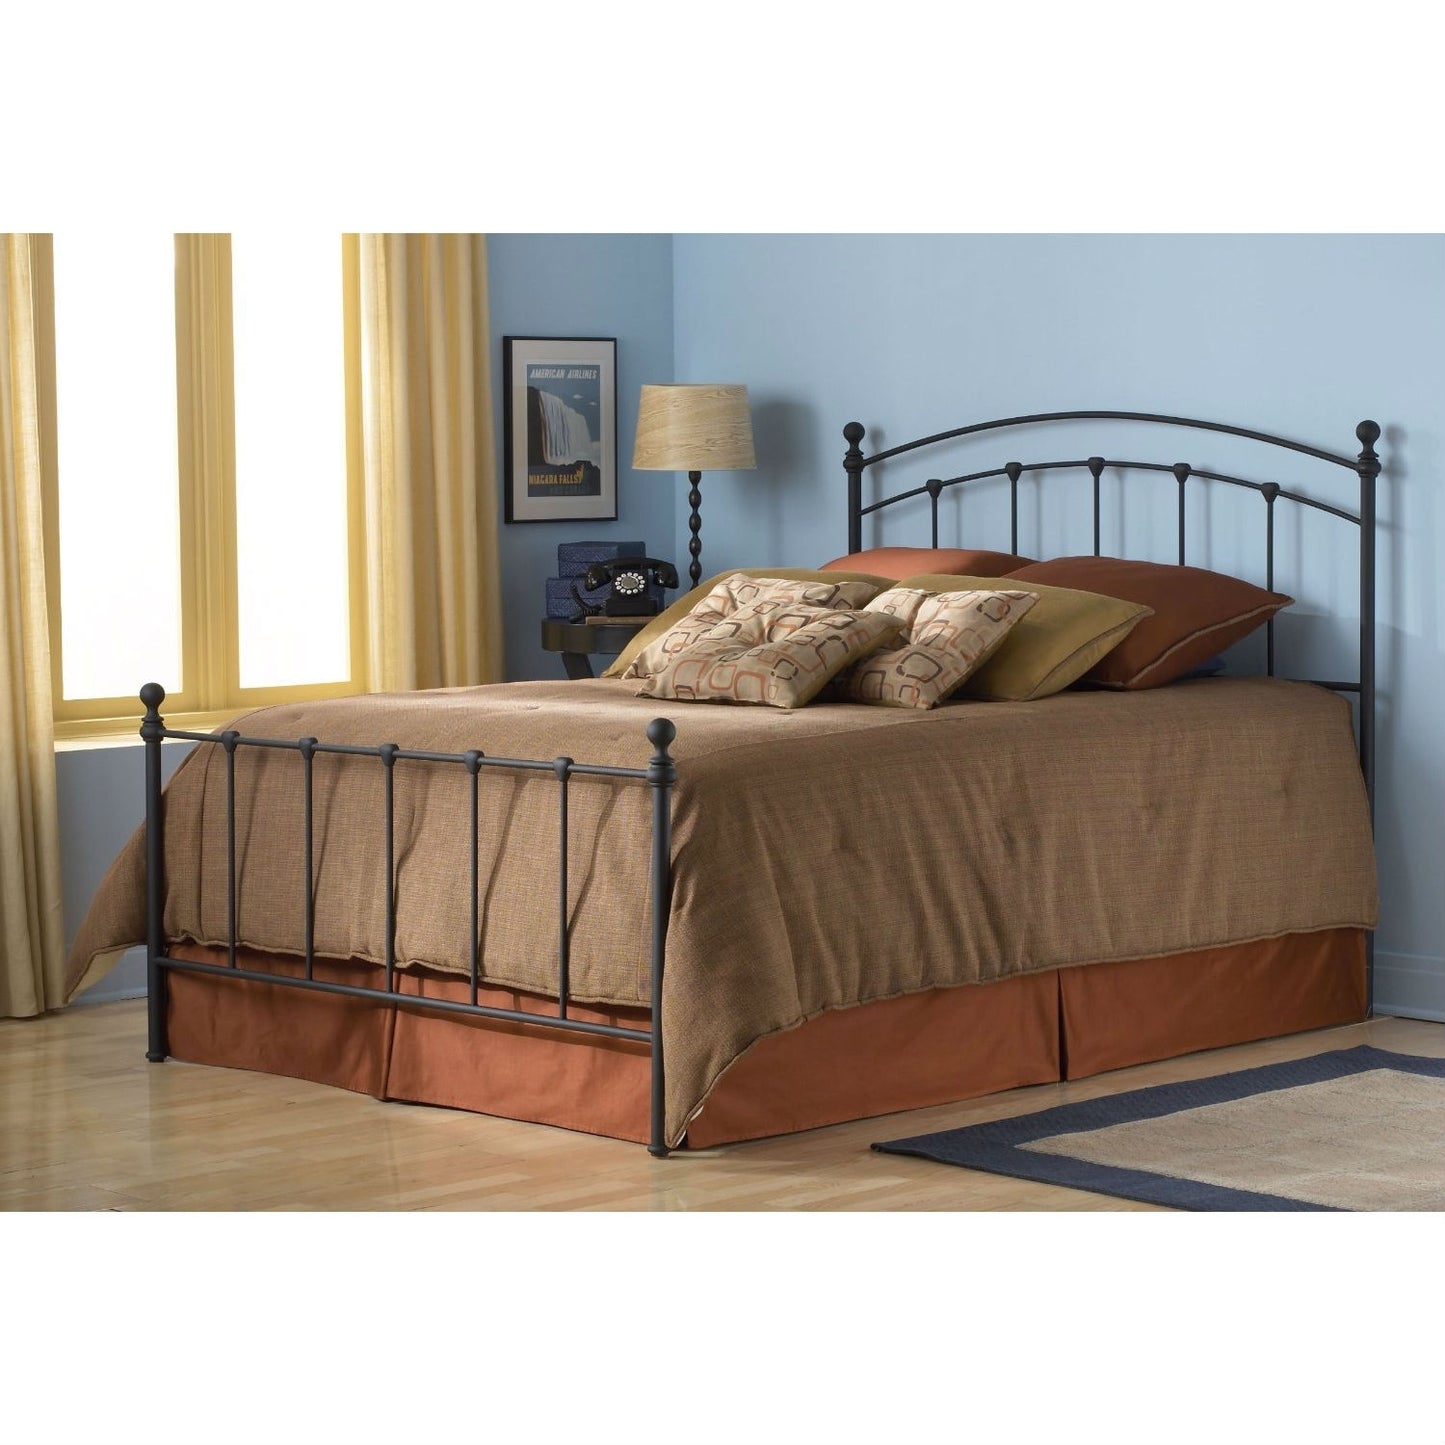 Queen size Metal Bed with Rounded Posts in Antique Brass Finish